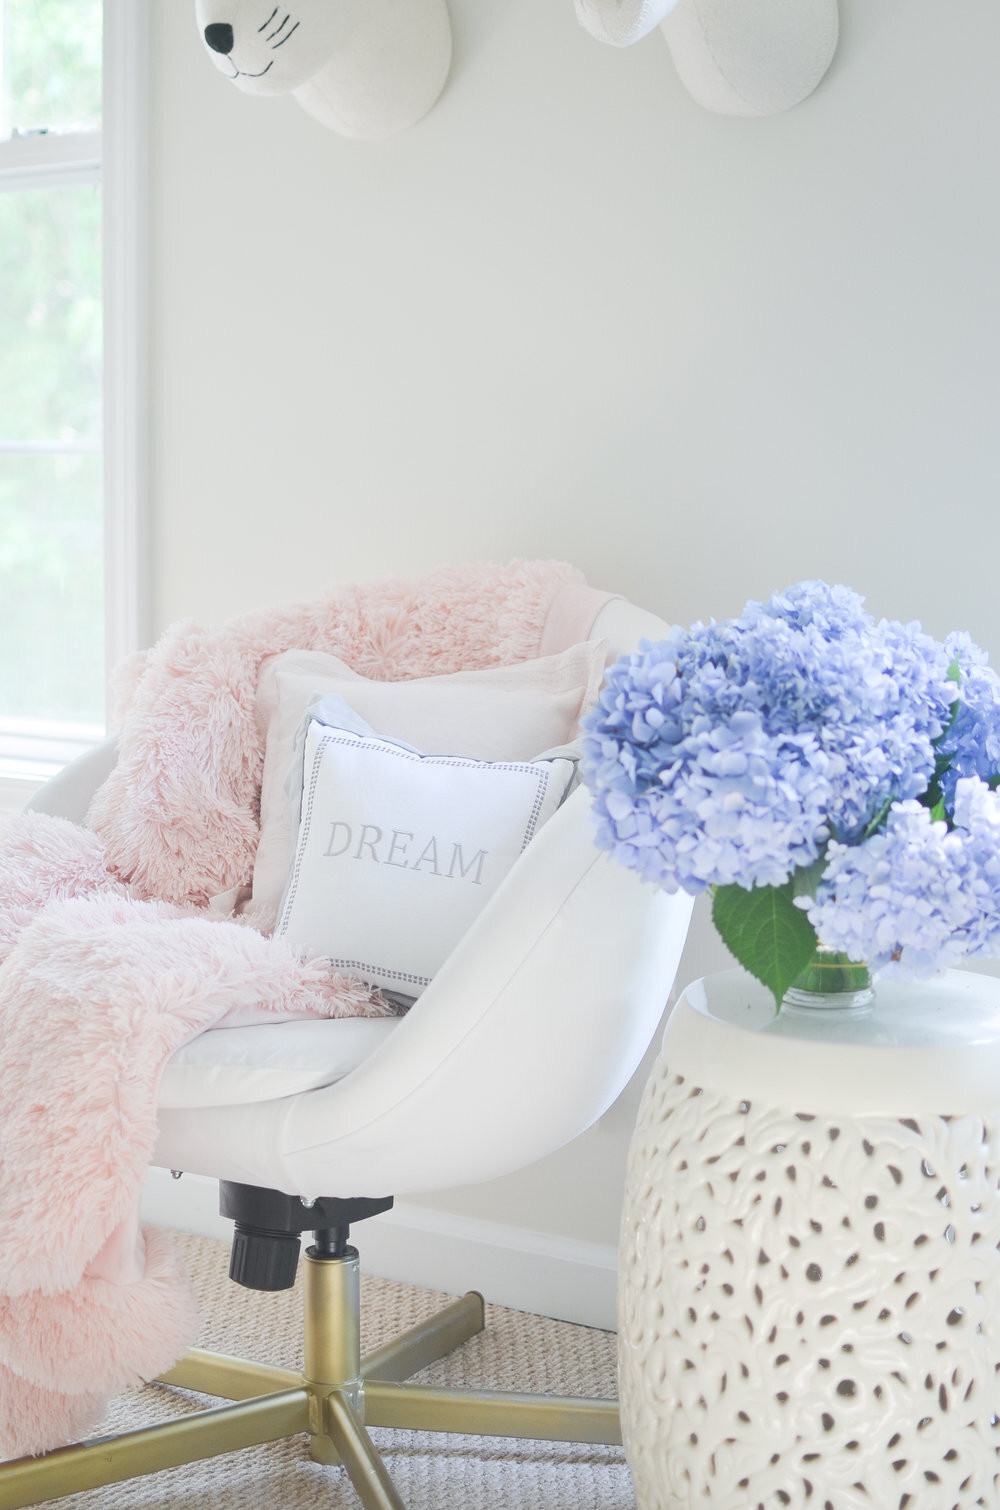 Pink+and+White+Dream+Girly+Nursery+Ideas+Decorations+Inspiration.jpg